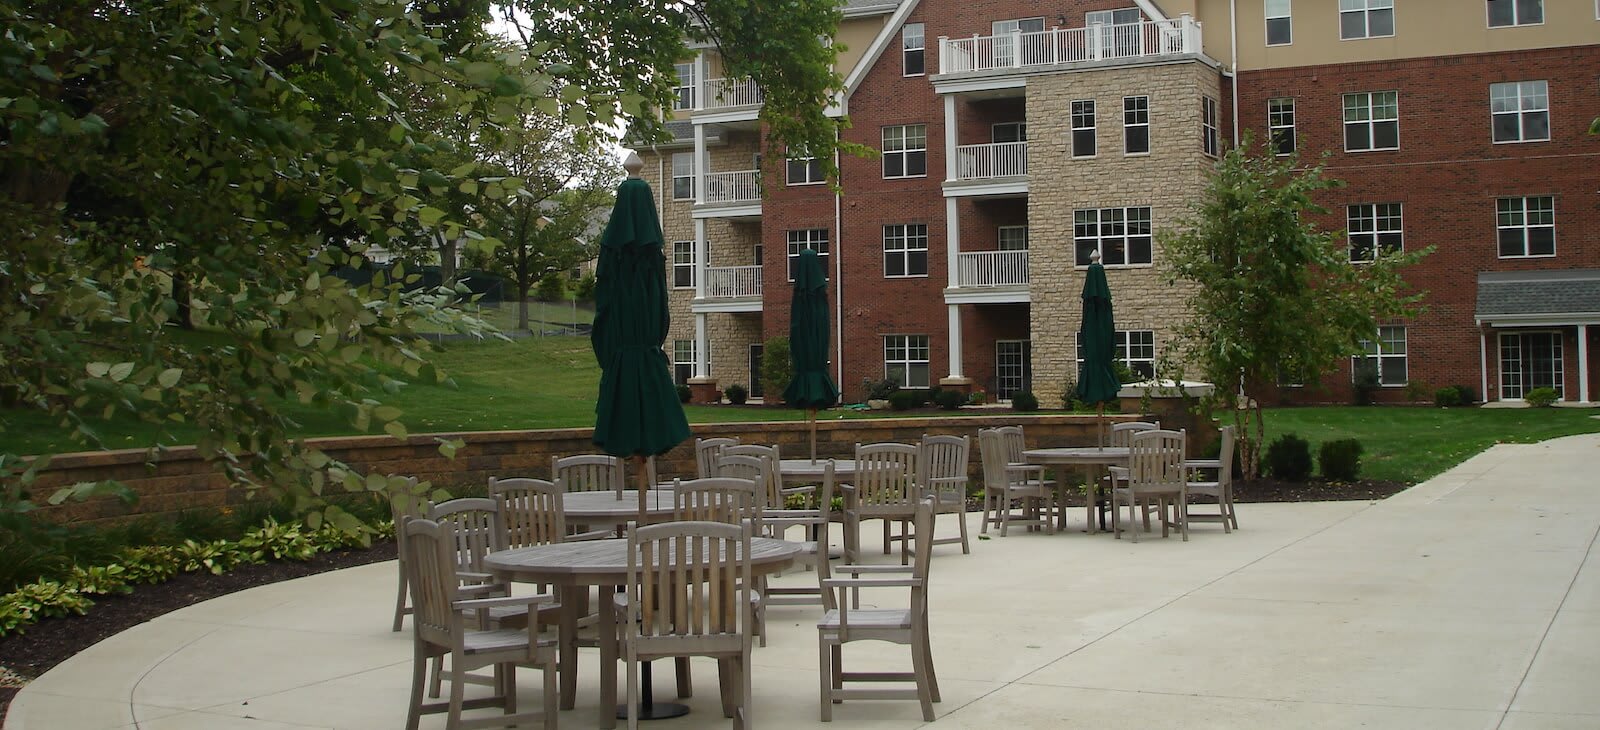 First Community Village, a CCRC patio